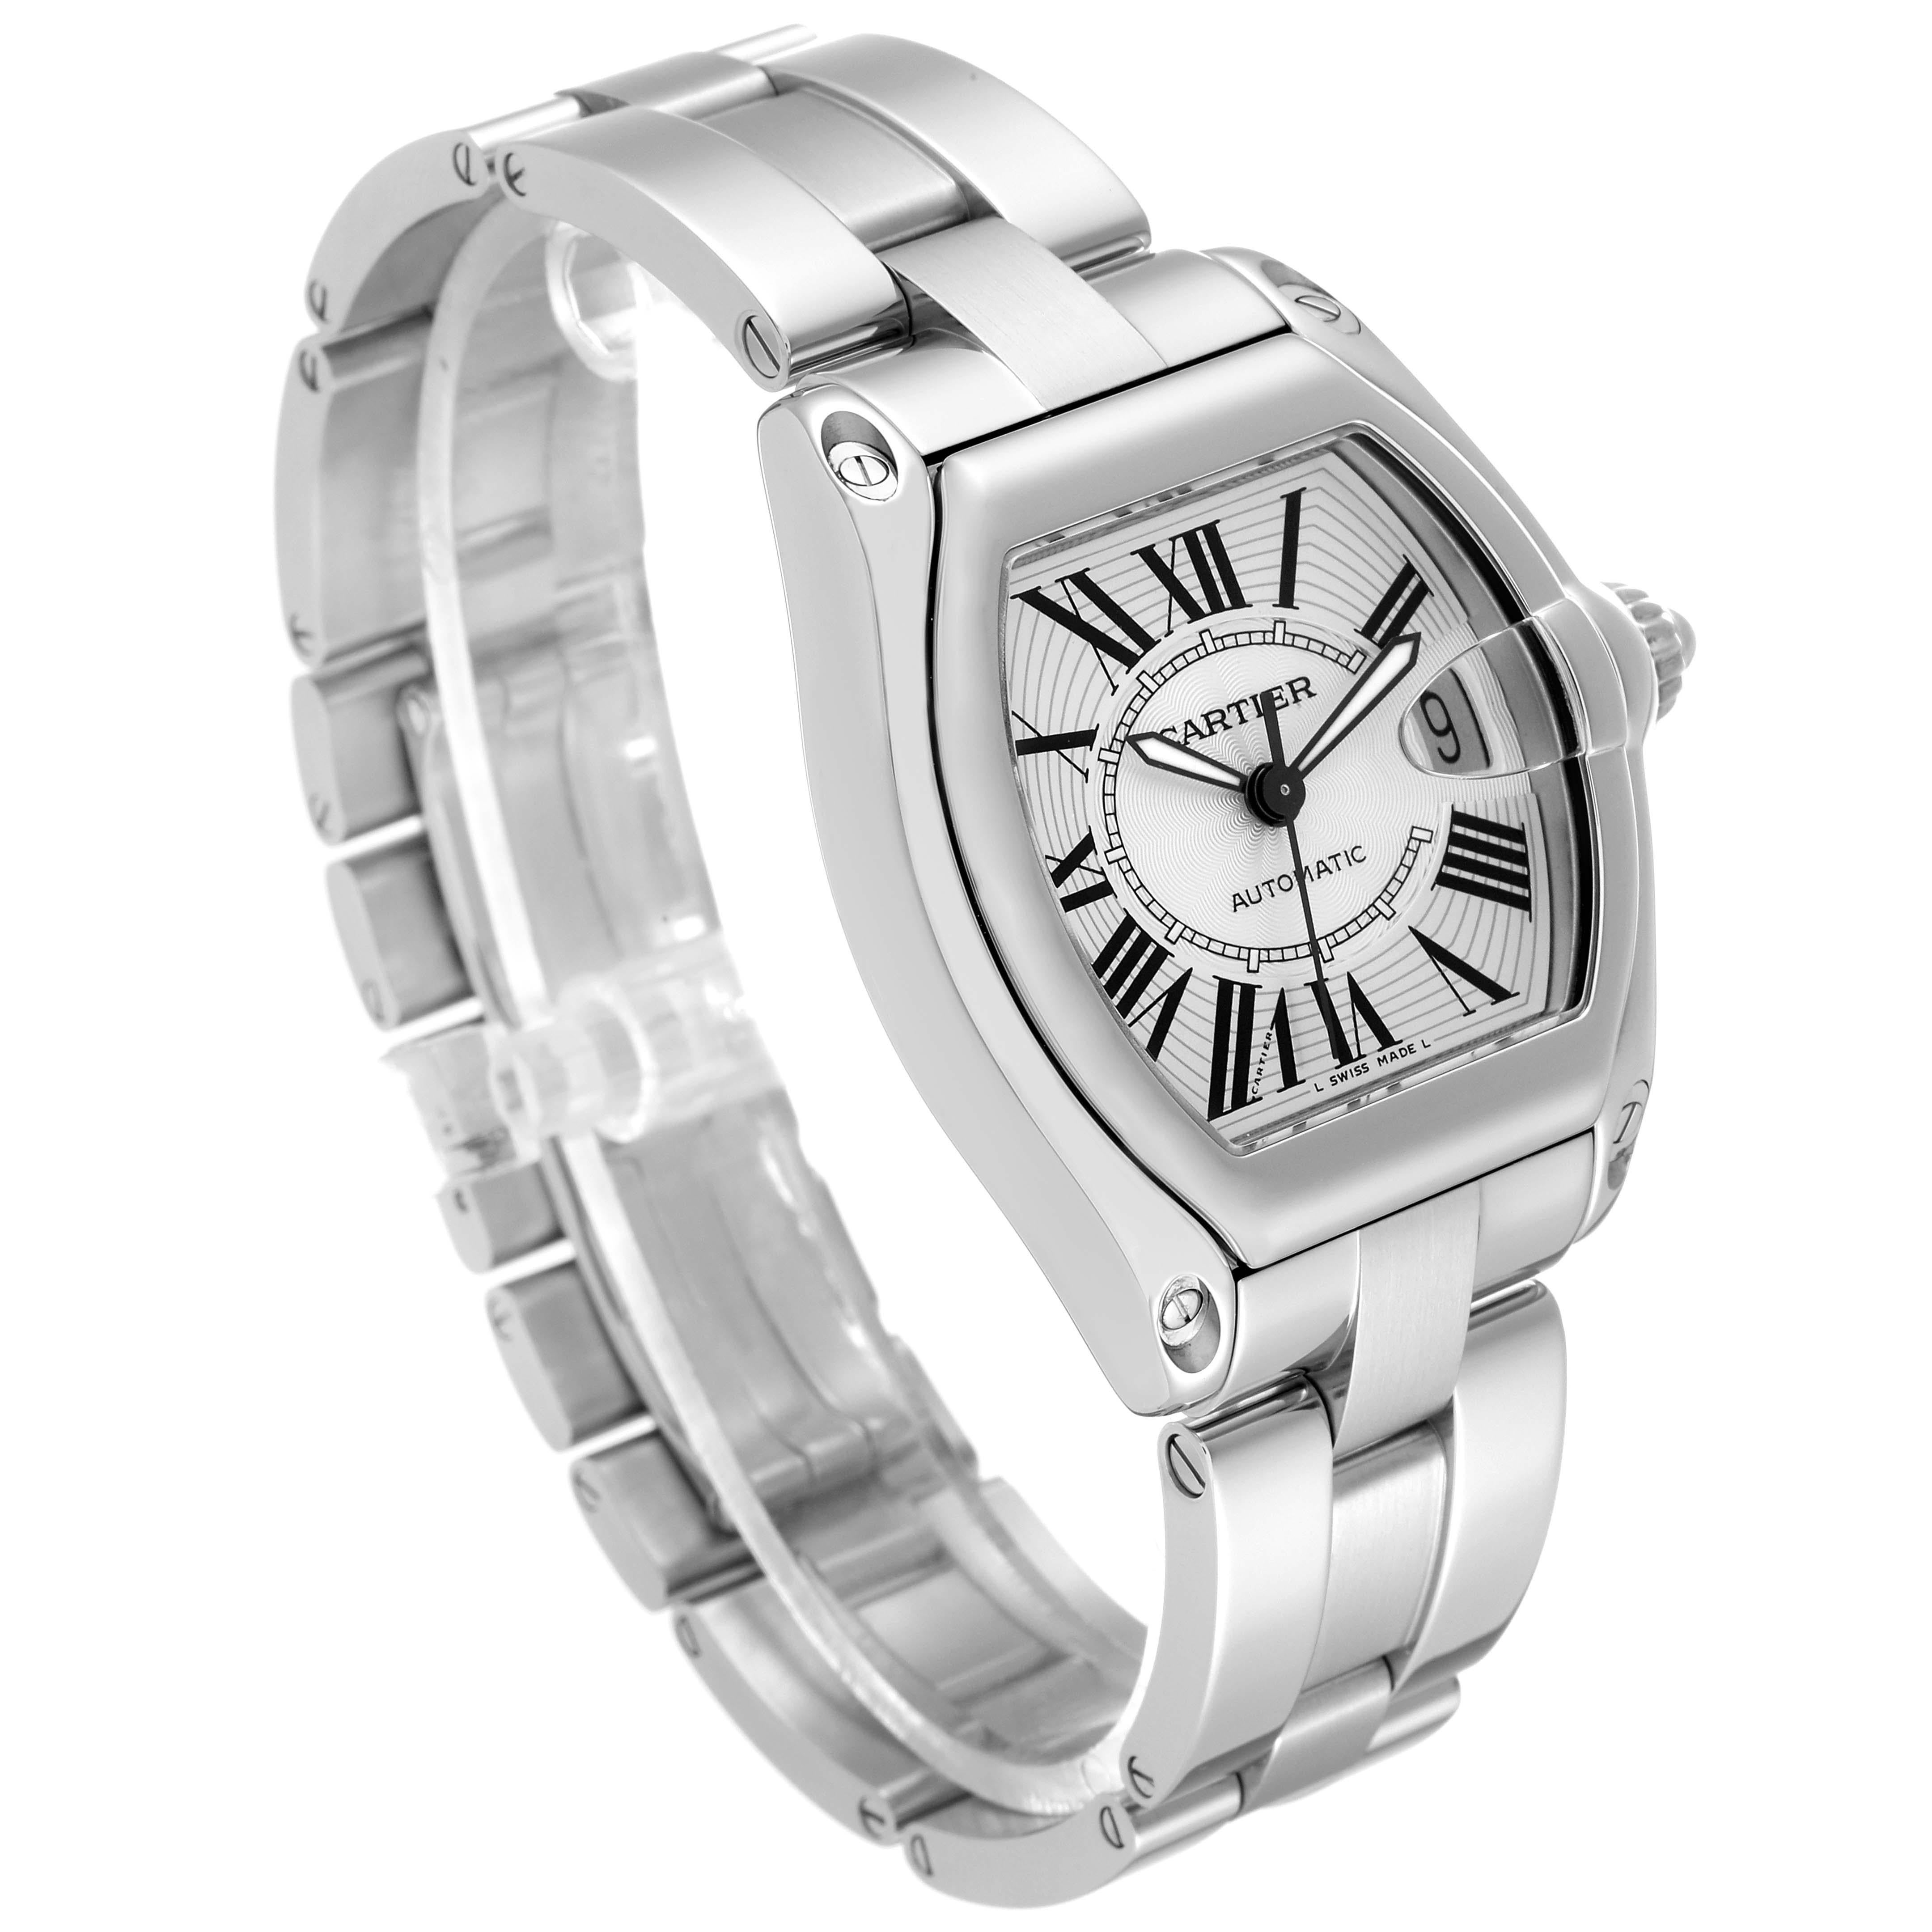  Cartier Roadster Large Silver Dial Steel Mens Watch W62025V3 Pour hommes 